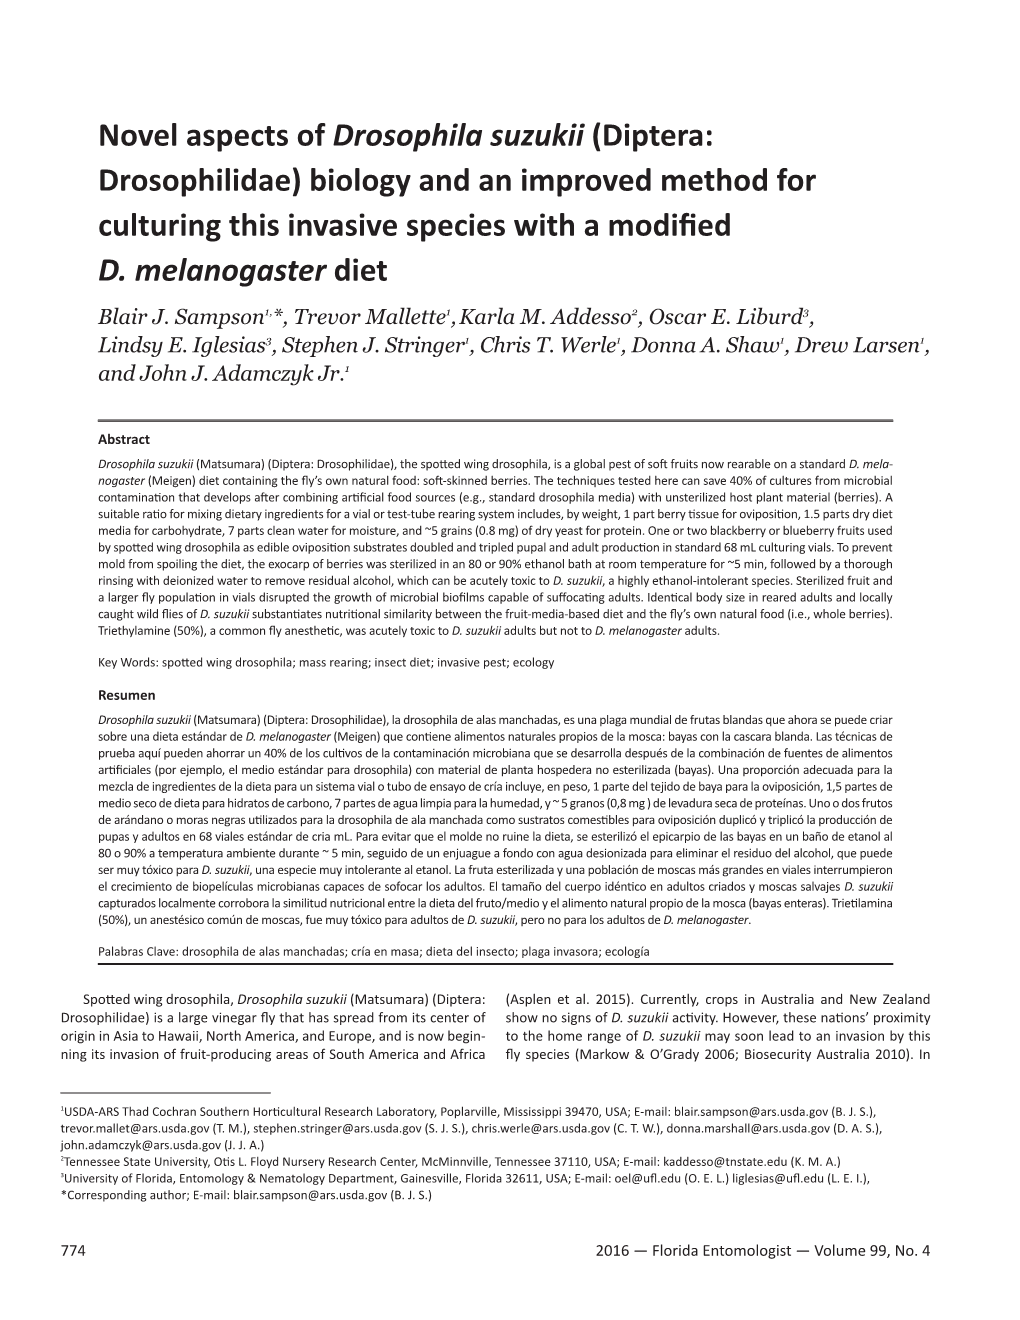 Novel Aspects of Drosophila Suzukii (Diptera: Drosophilidae) Biology and an Improved Method for Culturing This Invasive Species with a Modified D